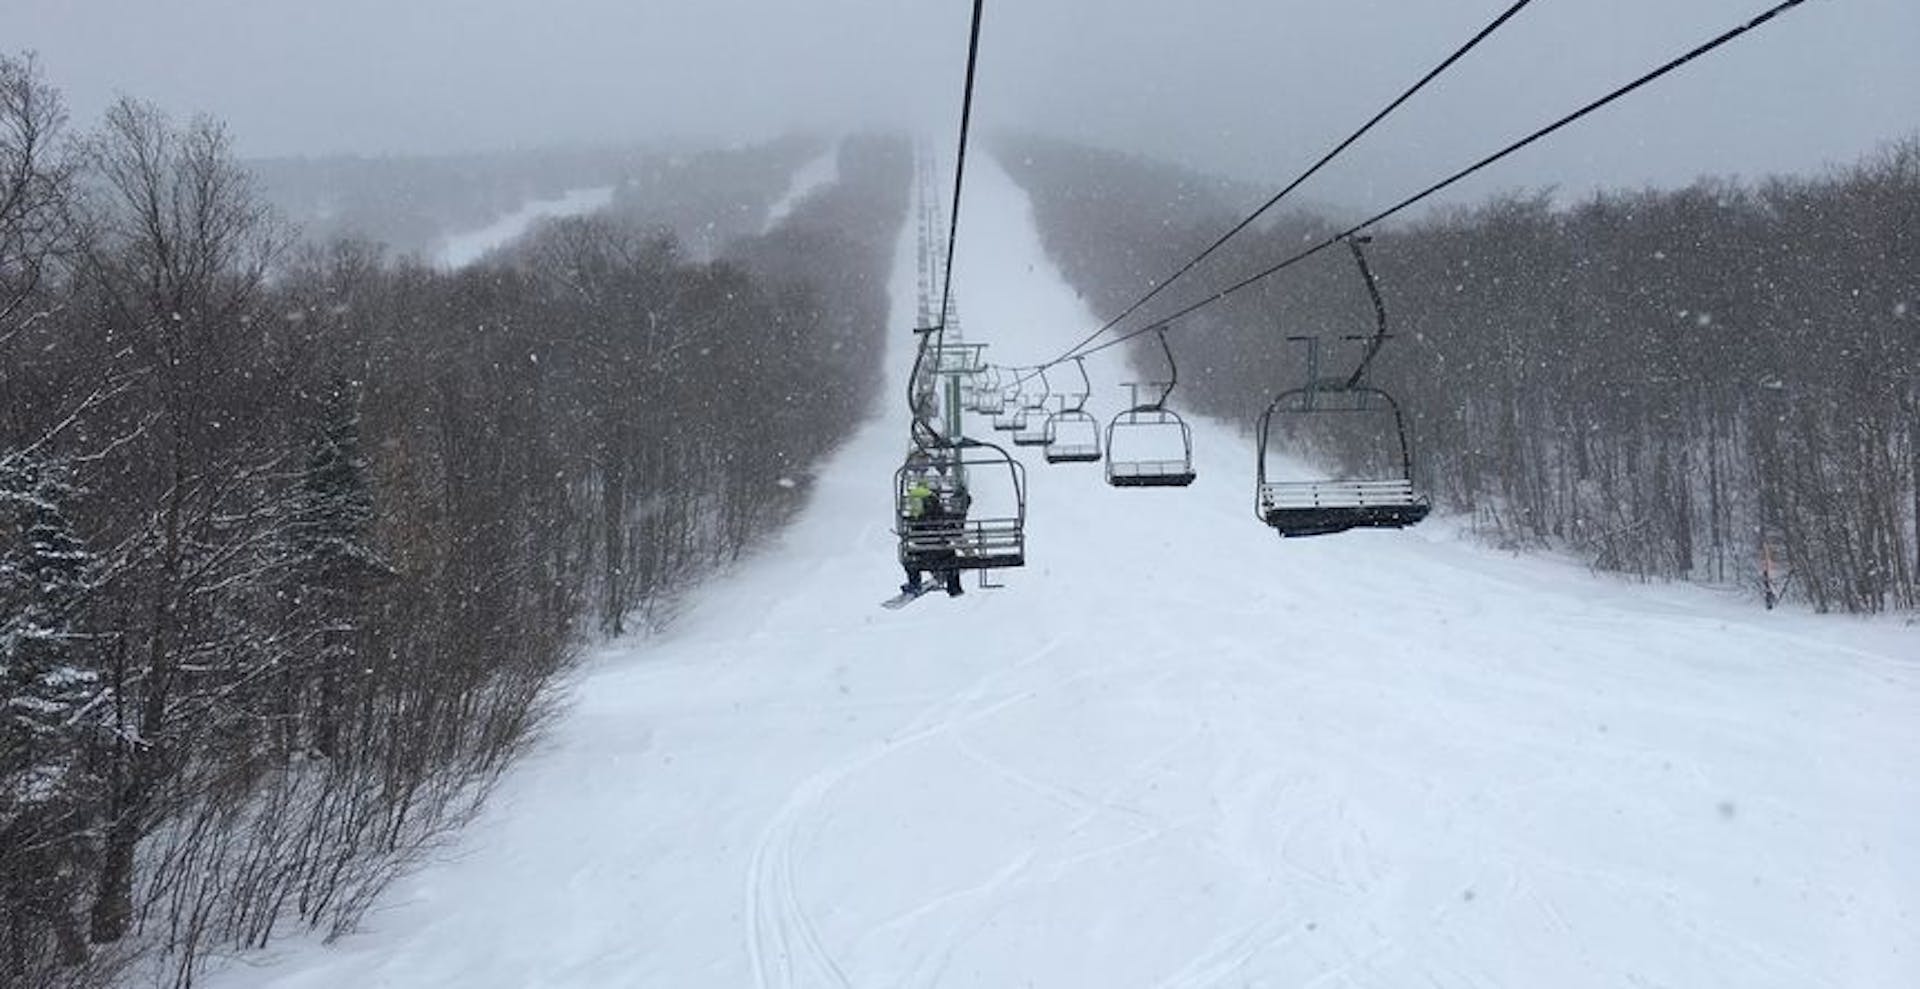 Jay Peak has some of the deepest powder around thanks to the ‘Jay Cloud’. | Photo Copyright: Greg Burke